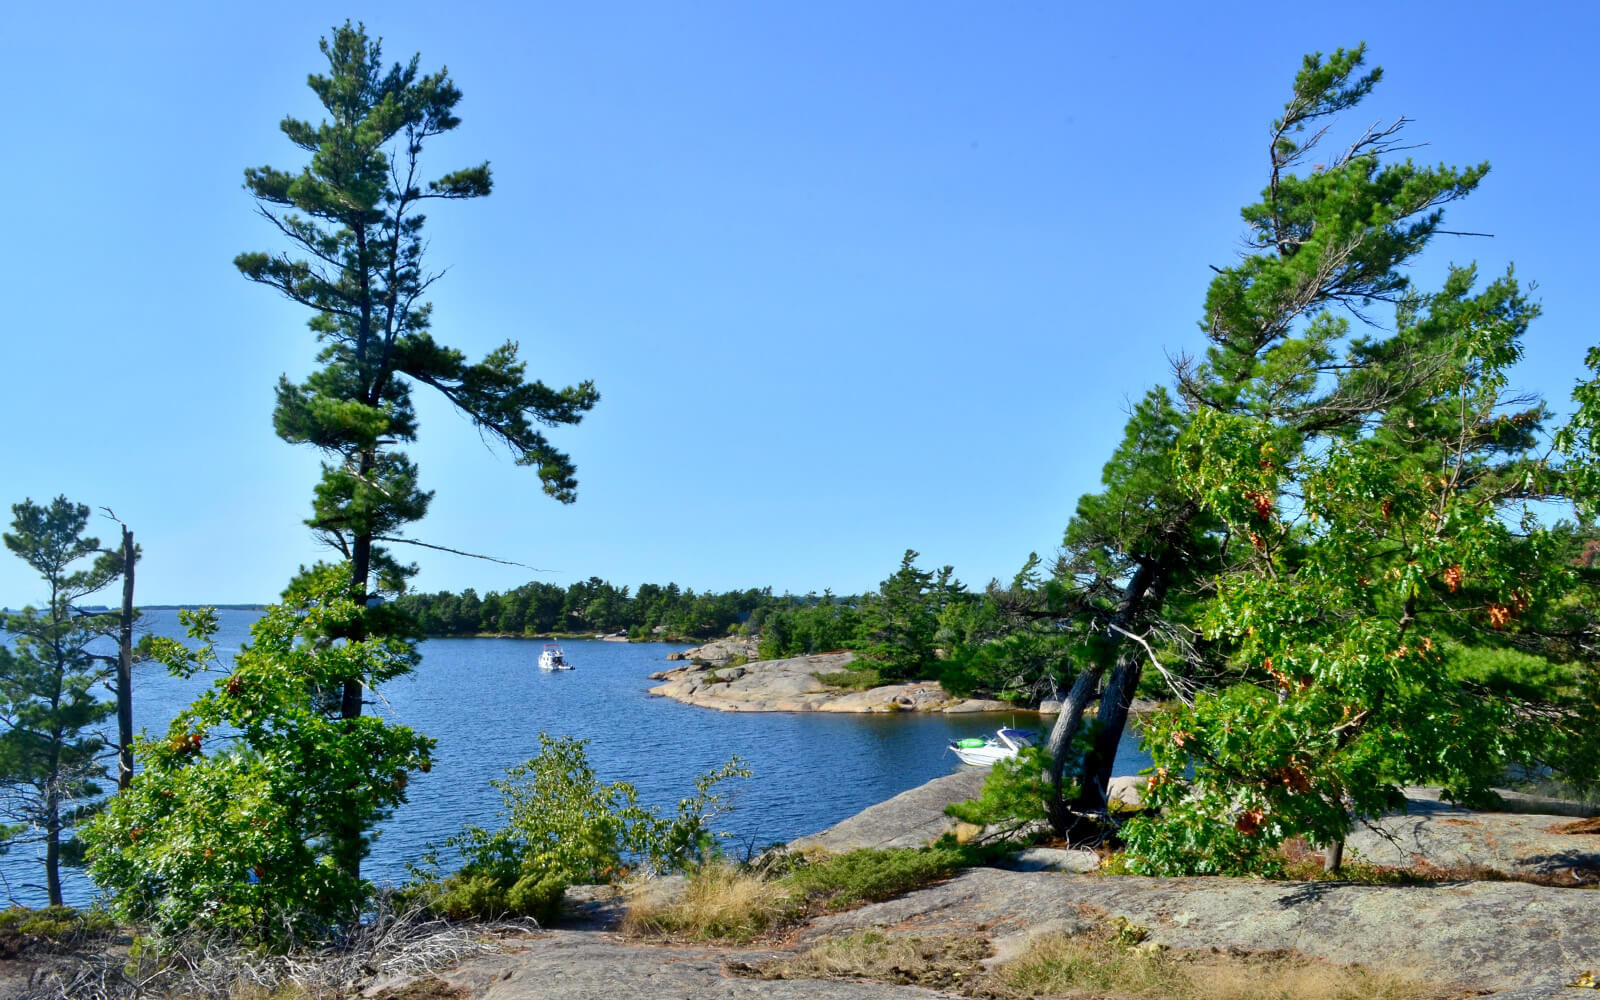 Ontario Road Trip Views Like These Windswept Pines in Muskoka Make it an Iconic Destination :: I've Been Bit! Travel Blog